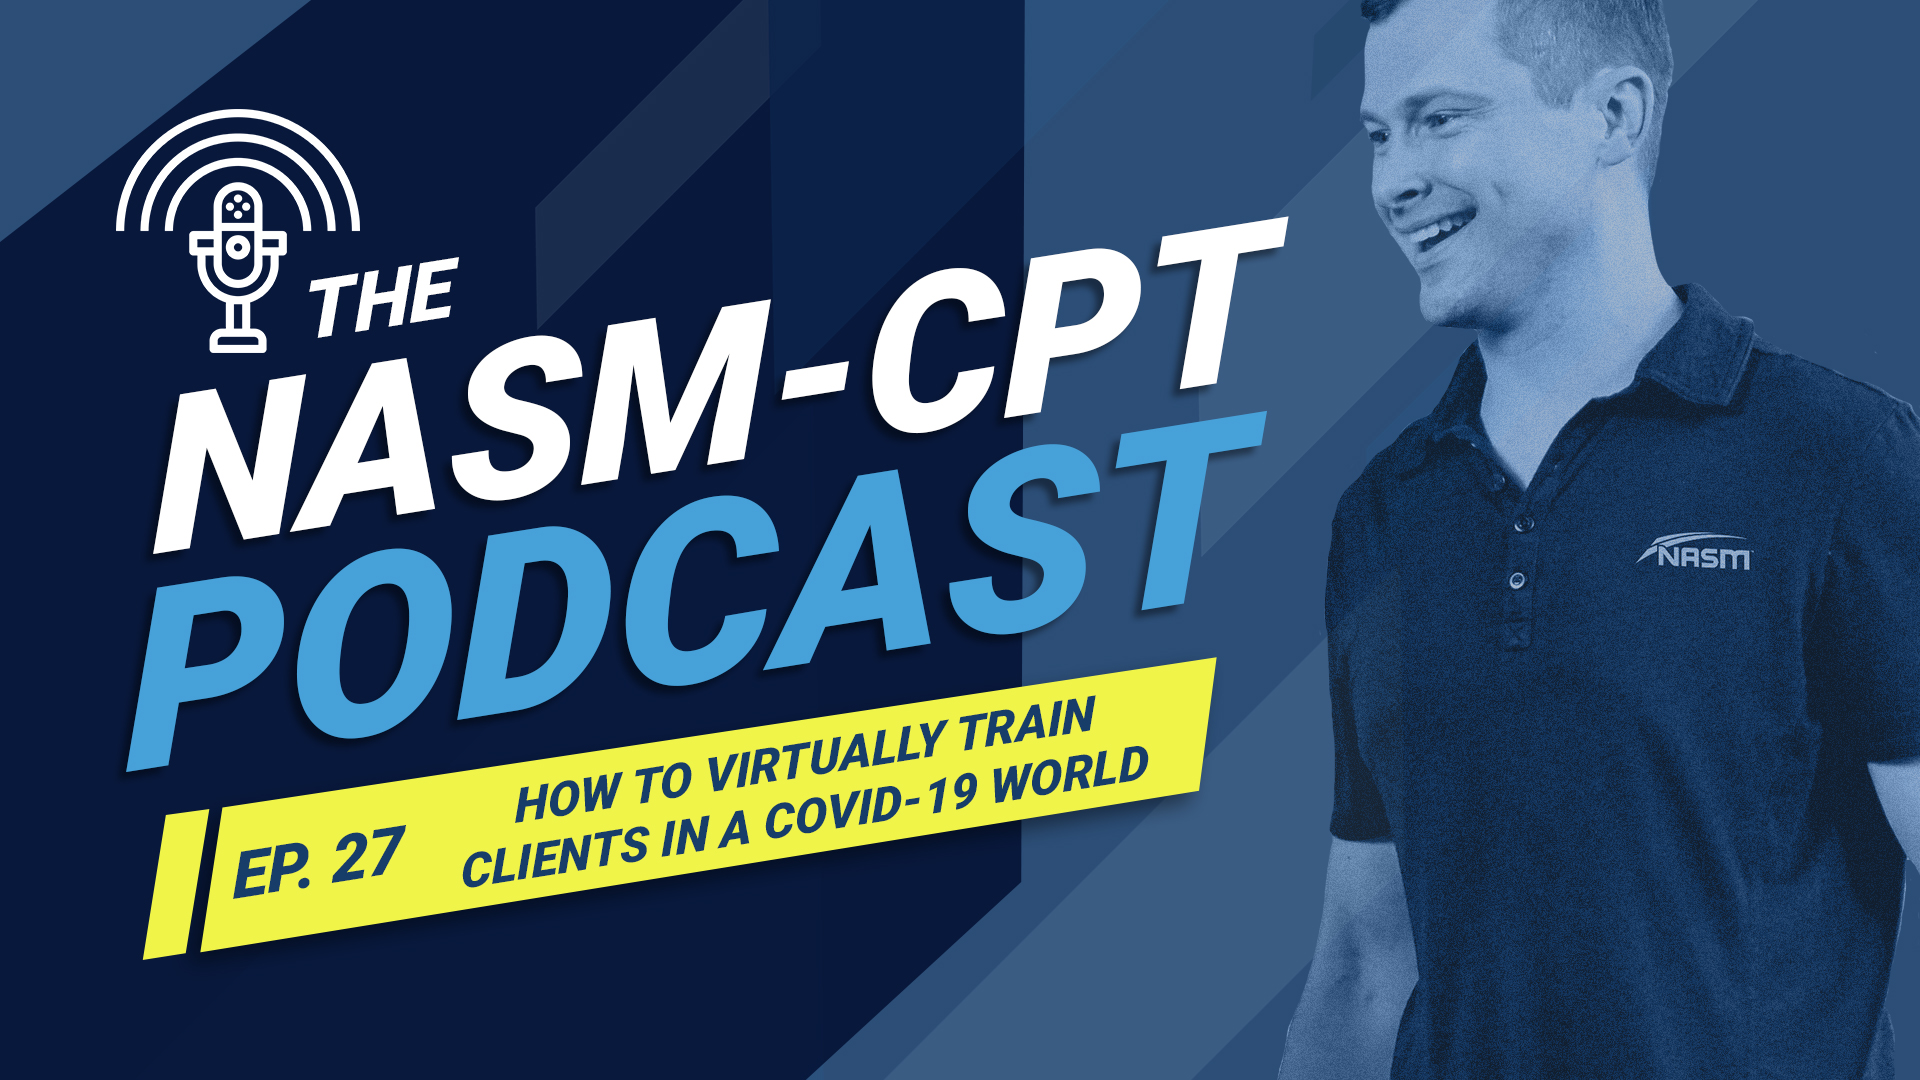 NASM-CPT Podcast Ep. 27